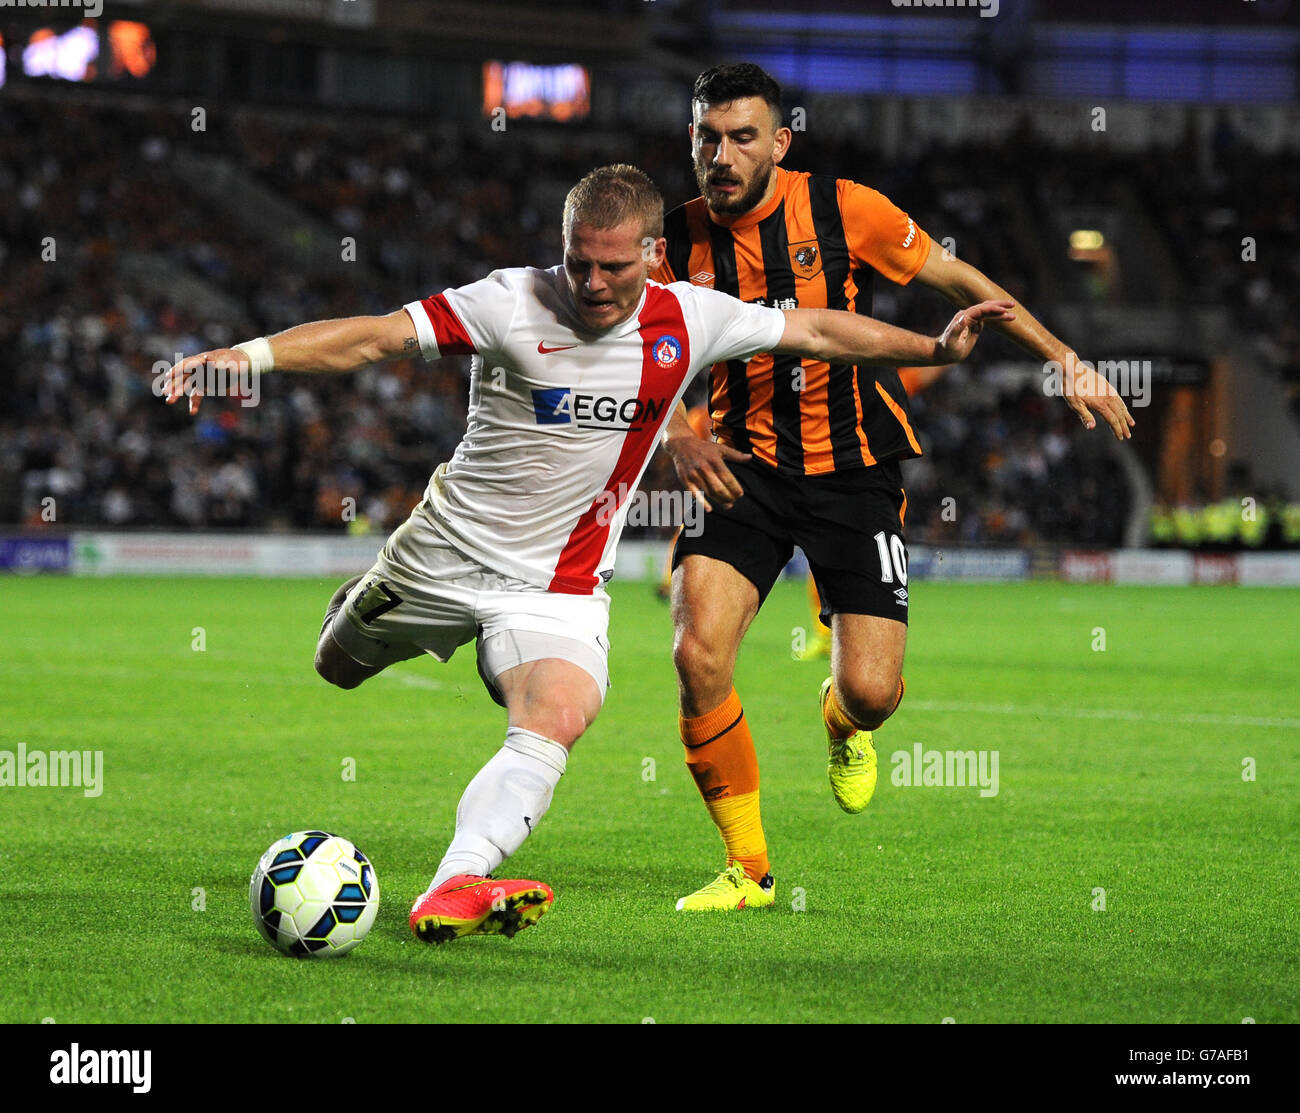 Soccer - UEFA Europa League - 3rd Qualifying Round - 2nd leg - Hull City v FK AS Trencin - KC Stadium. Hull City's Robert Snodgrass (right) and Trencin's Peter Cogley (left) battle for the ball. Stock Photo